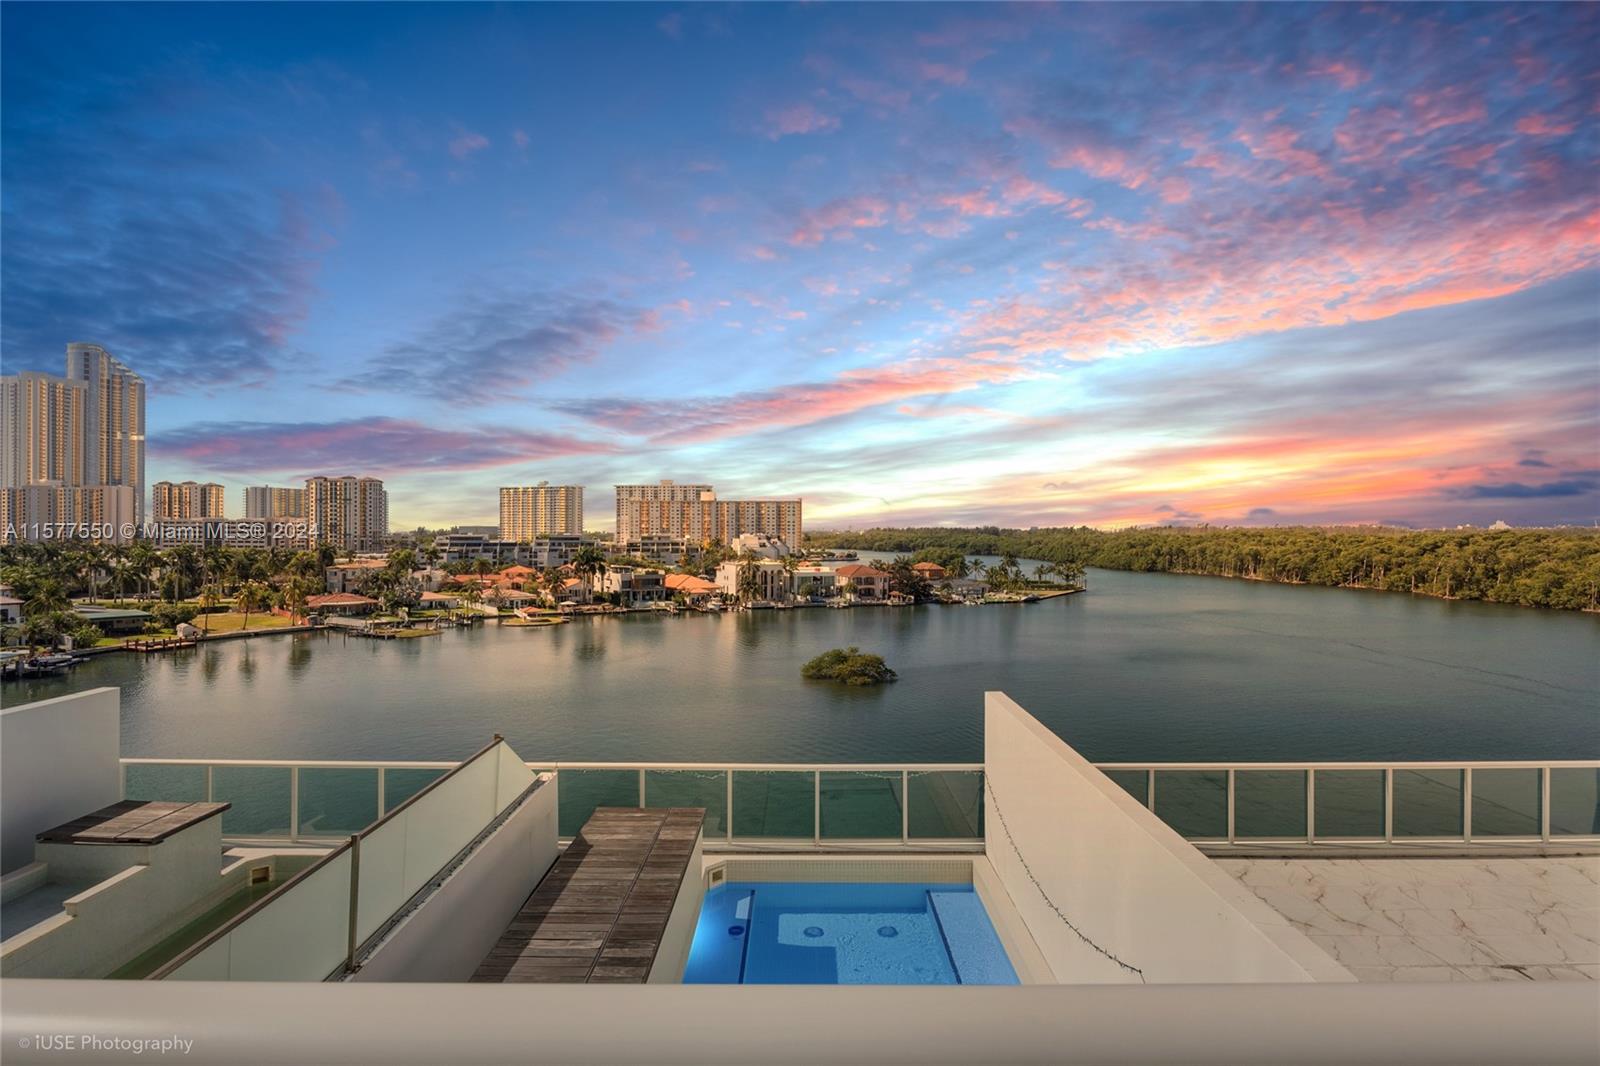 Don't miss the opportunity to purchase an amazing 3 bedroom/2 bathroom and half with an amazing view! Walking distance to the beach, shoppings and restaurants. Best price. Located on the very desirable Sunny Isles Beach, this unit is finished with the Italian furniture. A must see. Open kitchen with  water view. Marina is available managed by a third party. Tennis courts, pool, sauna, gym. 2 assigned parking spaces plus storage.Very private floor plan with plenty of storage. Valet and concierge 24/7. Bar at the pool area, beach 2 blocks away.